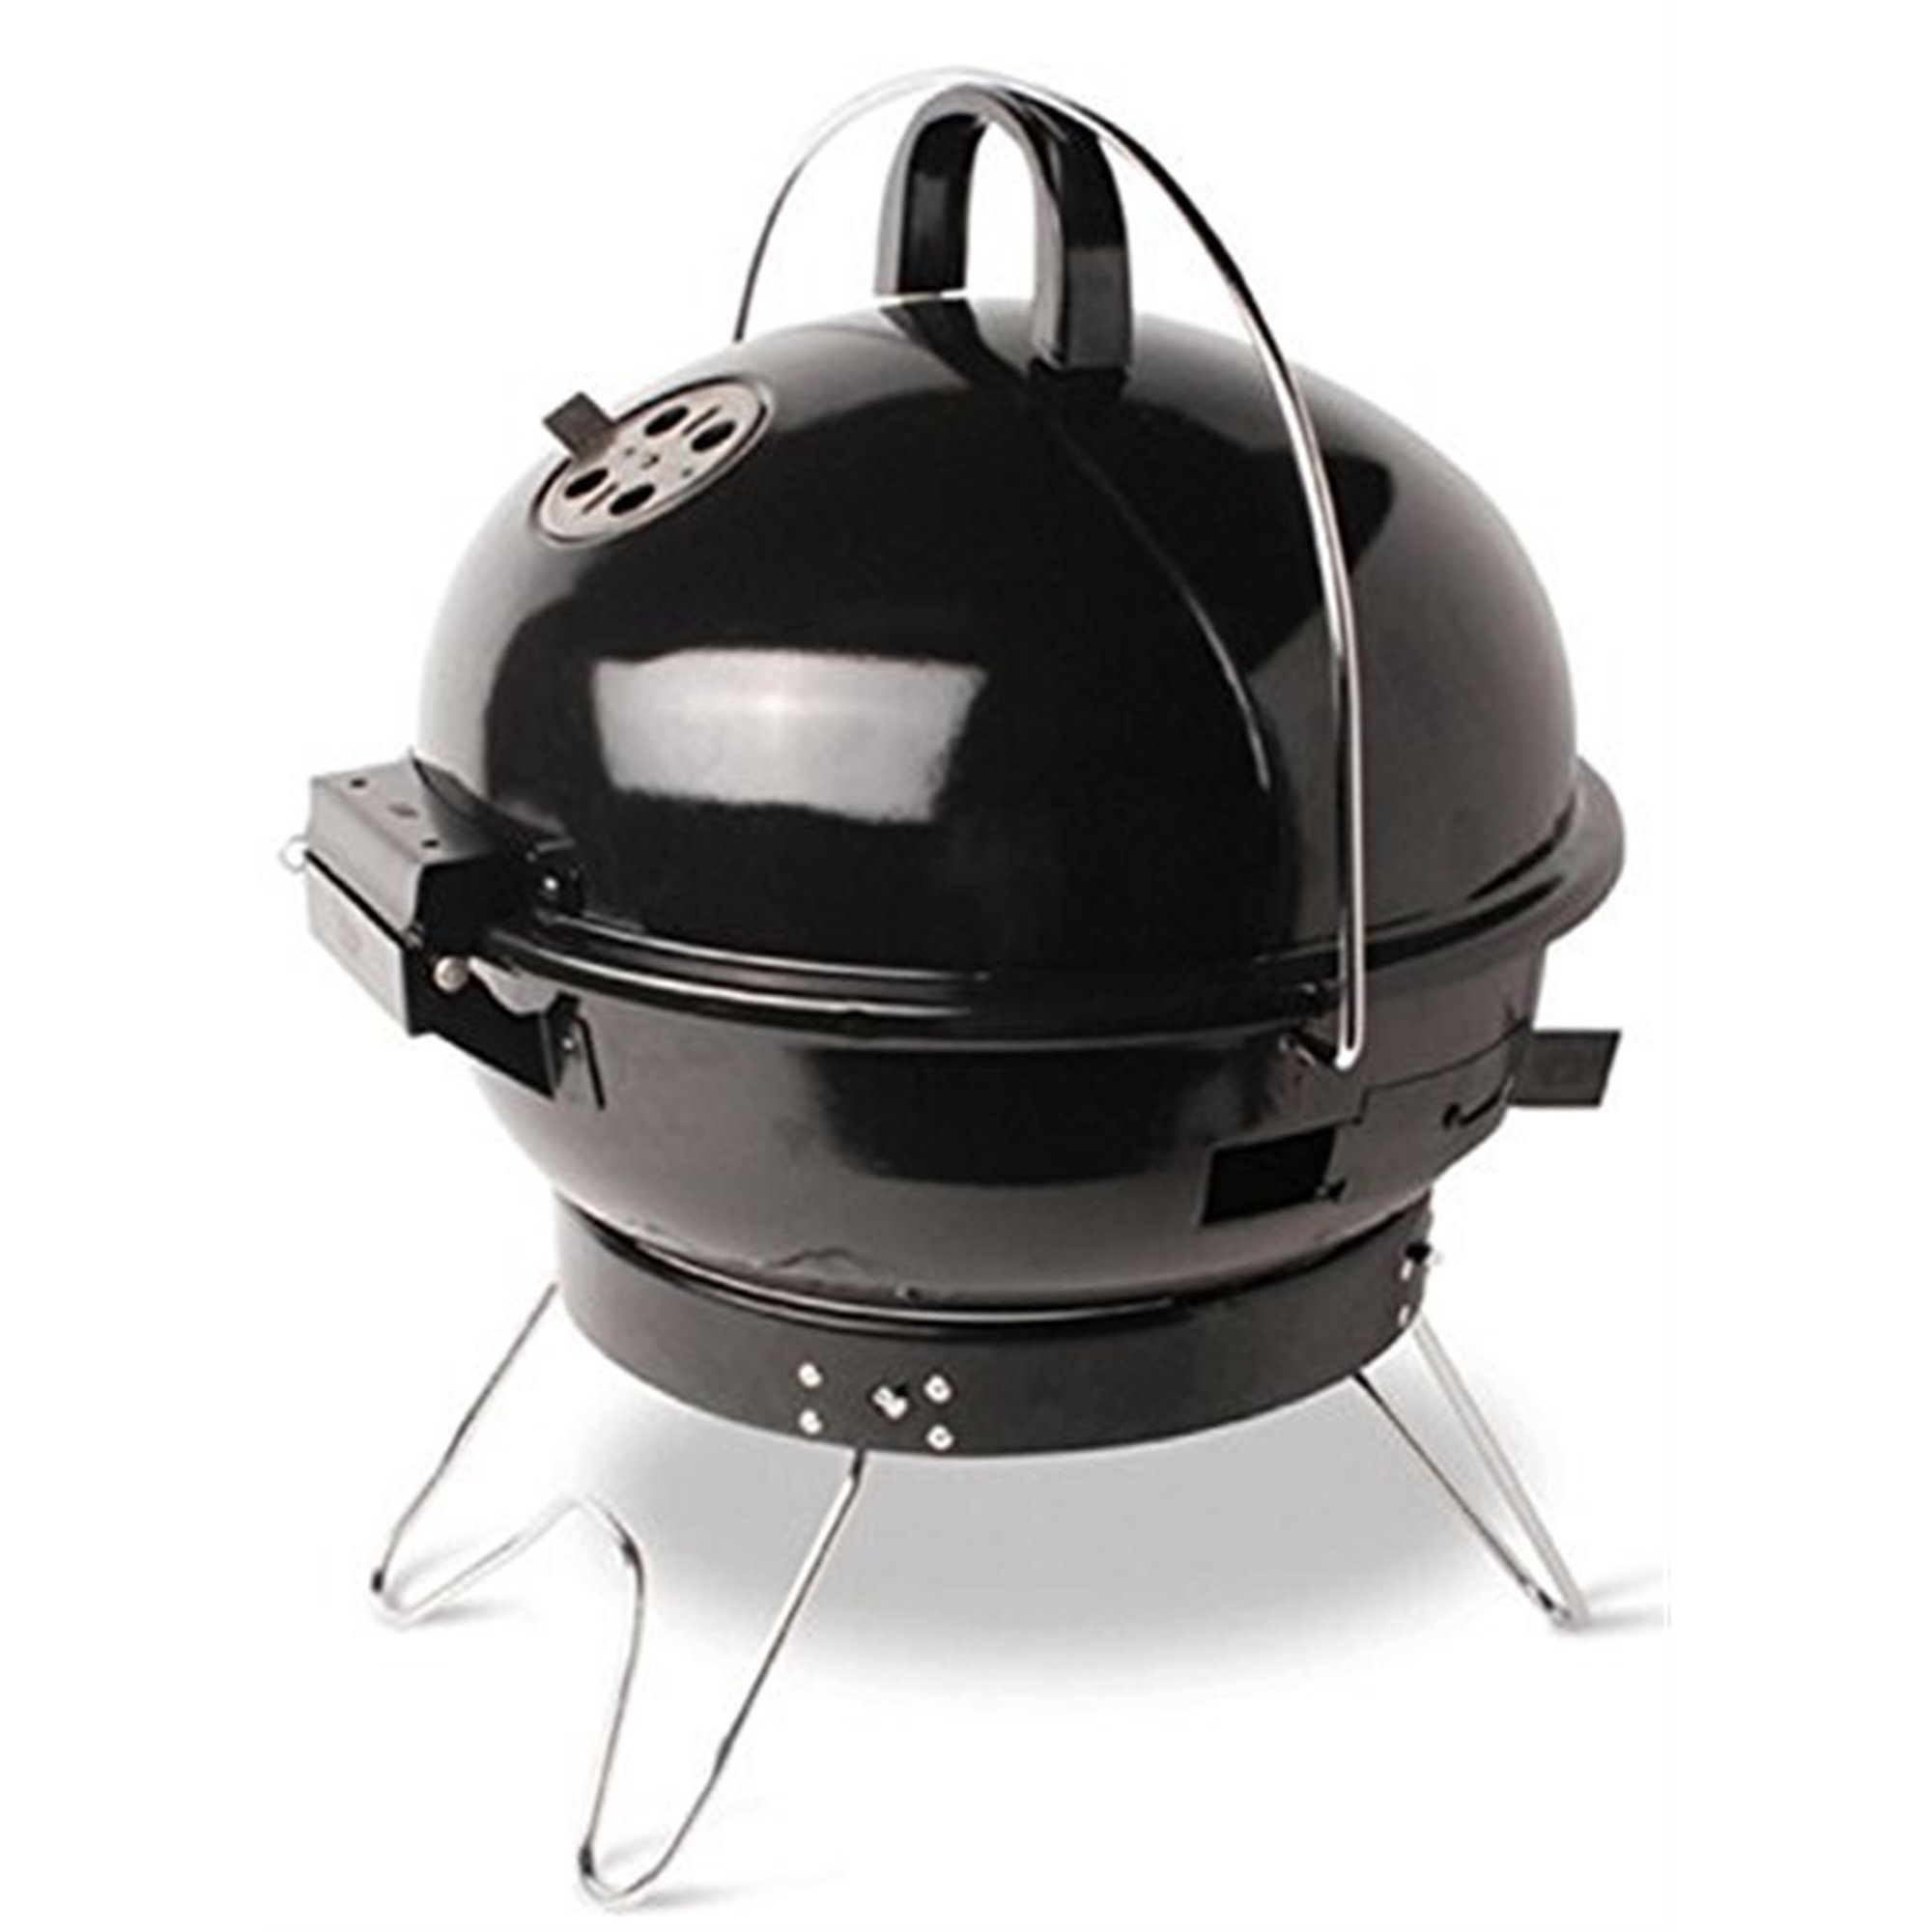 Bond Kettle Charcoal Grill